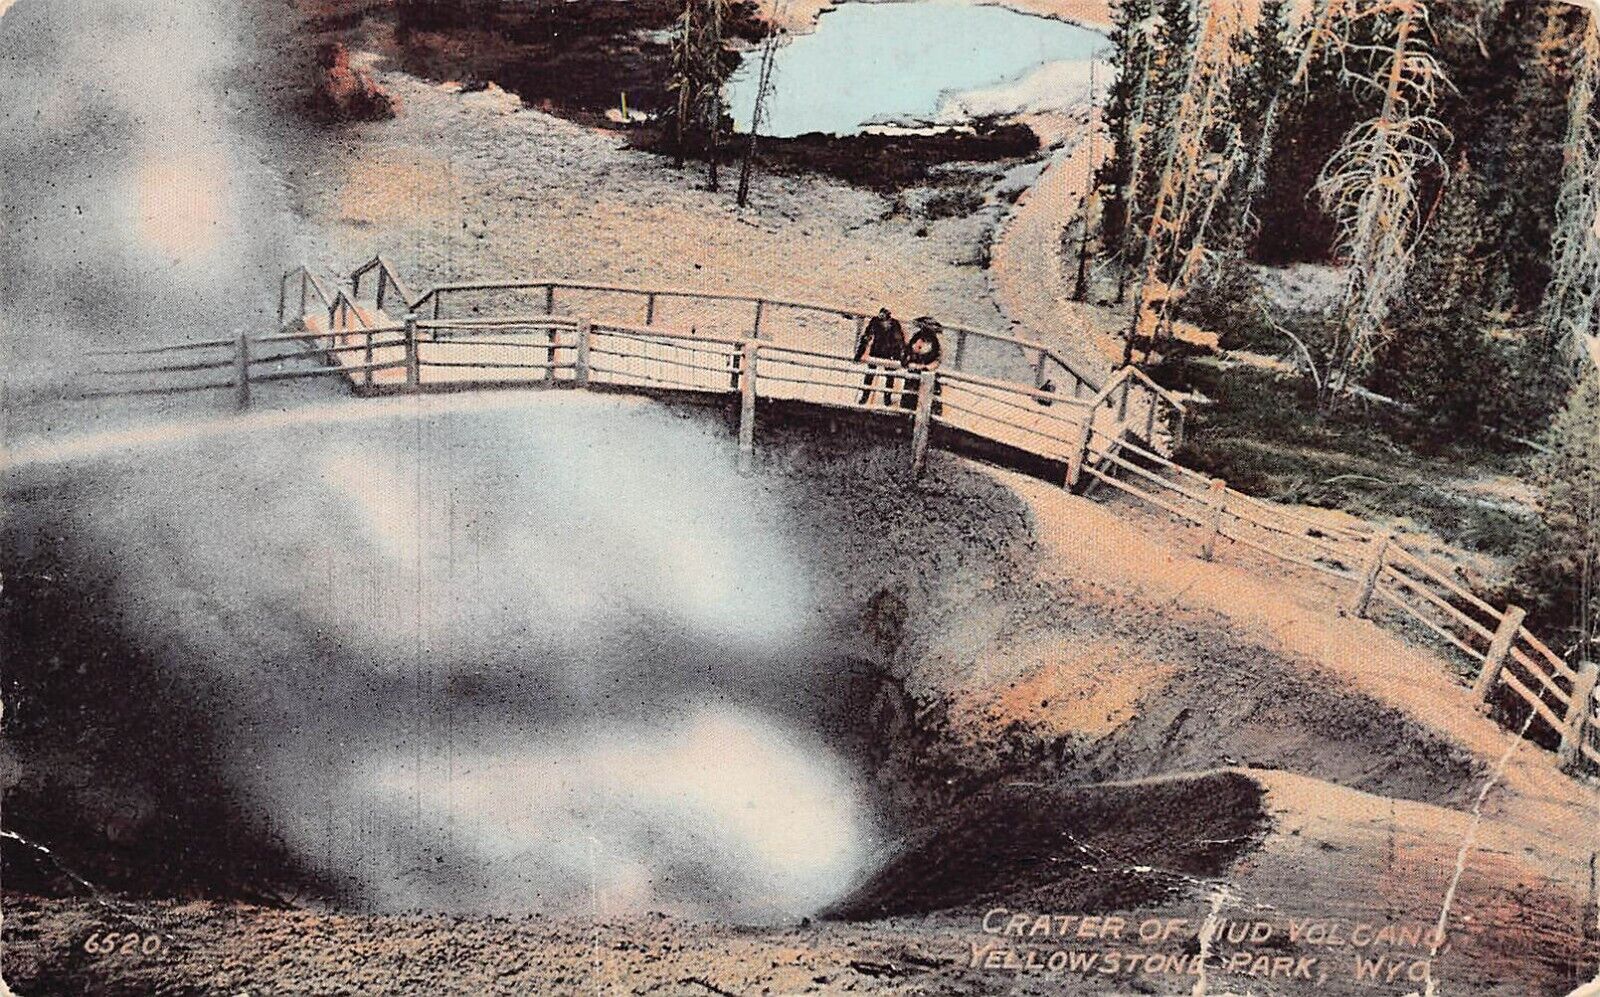 Mammoth Hot Springs WY Wyoming Yellowstone Crater Of Mud Volcano Vtg Postcard Z4